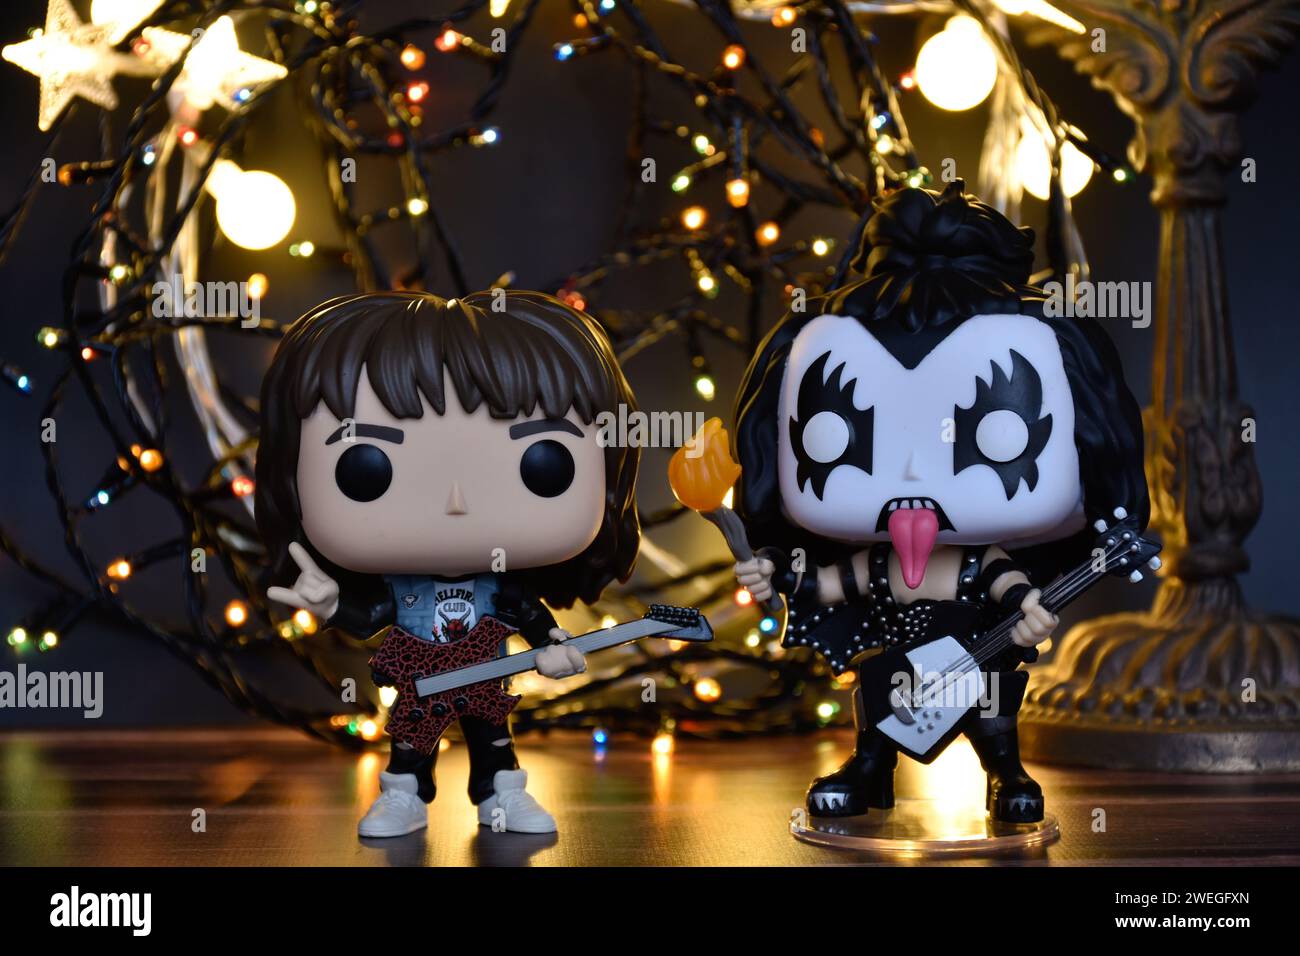 Funko Pop action figures of Eddie from TV series Stranger Things and Gene Simmons The Demon, rock band Kiss. Warm lighting, black background. Stock Photo